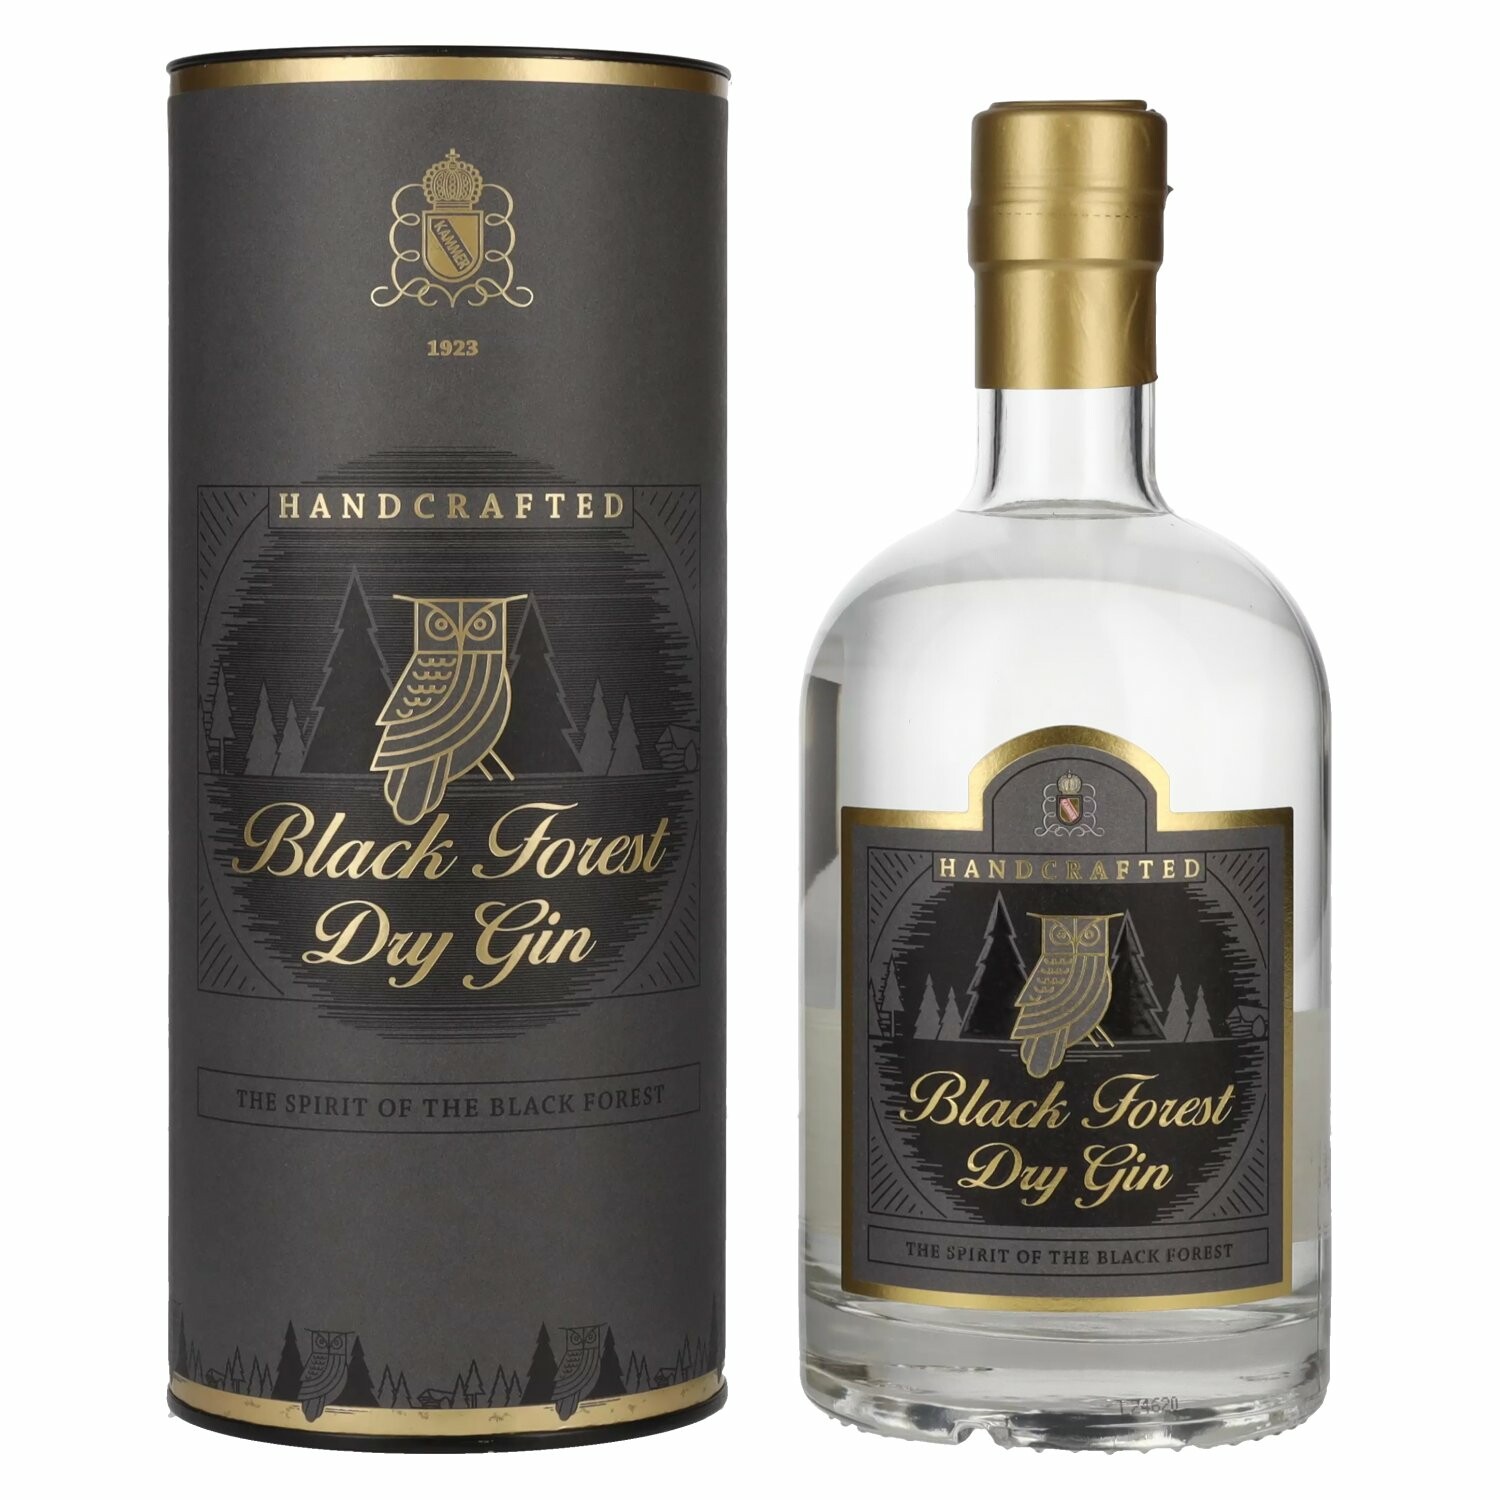 Black Forest Dry Gin 47% Vol. 0,7l in Giftbox